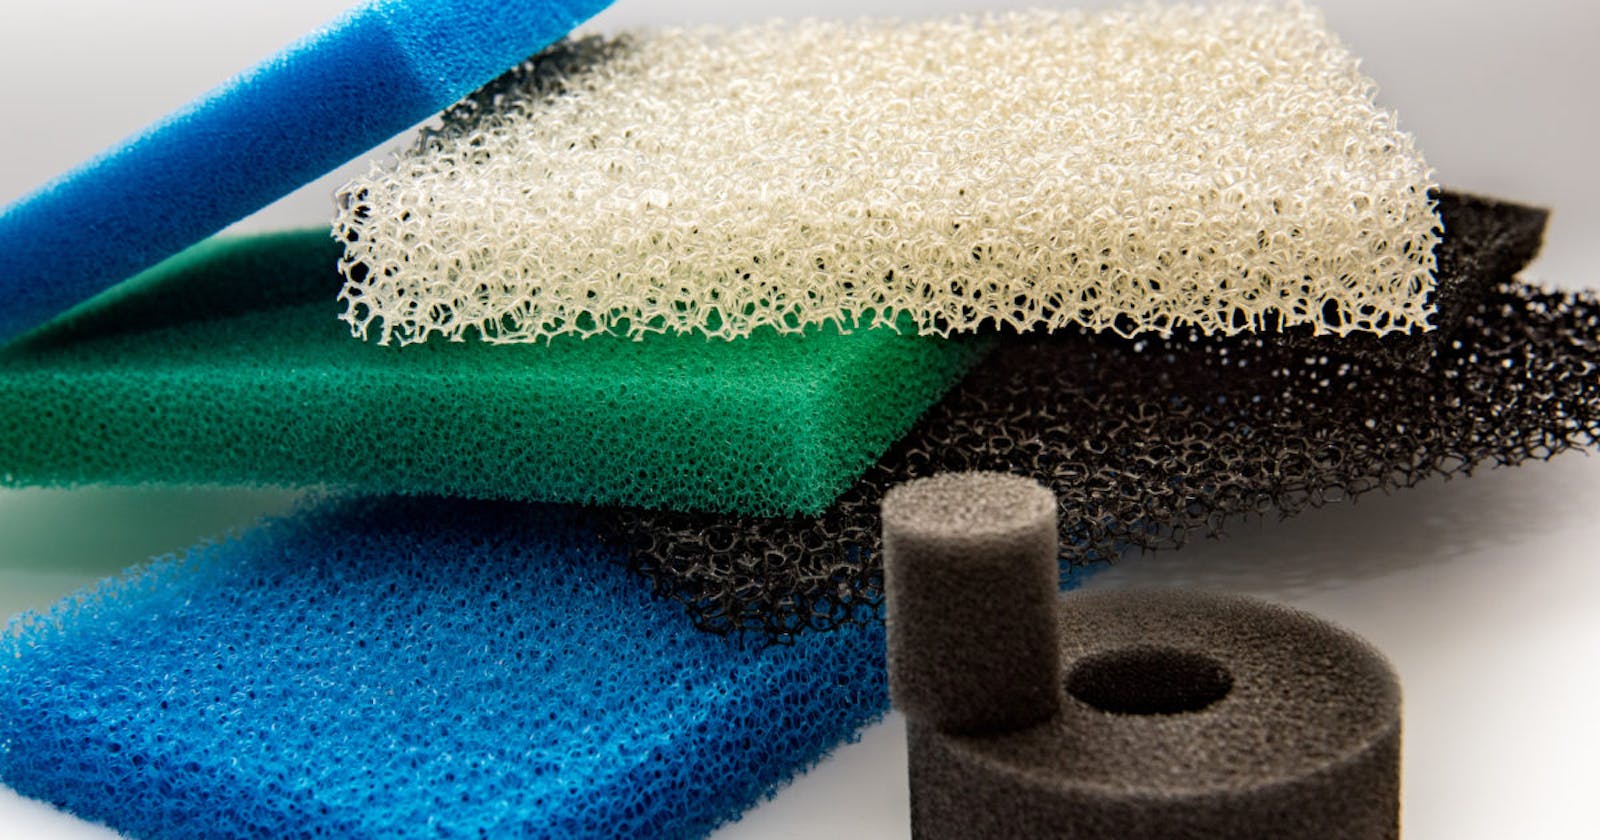 Polyurethane Foam Market 2022: Growth, Size, Share, Trends and Forecast 2027